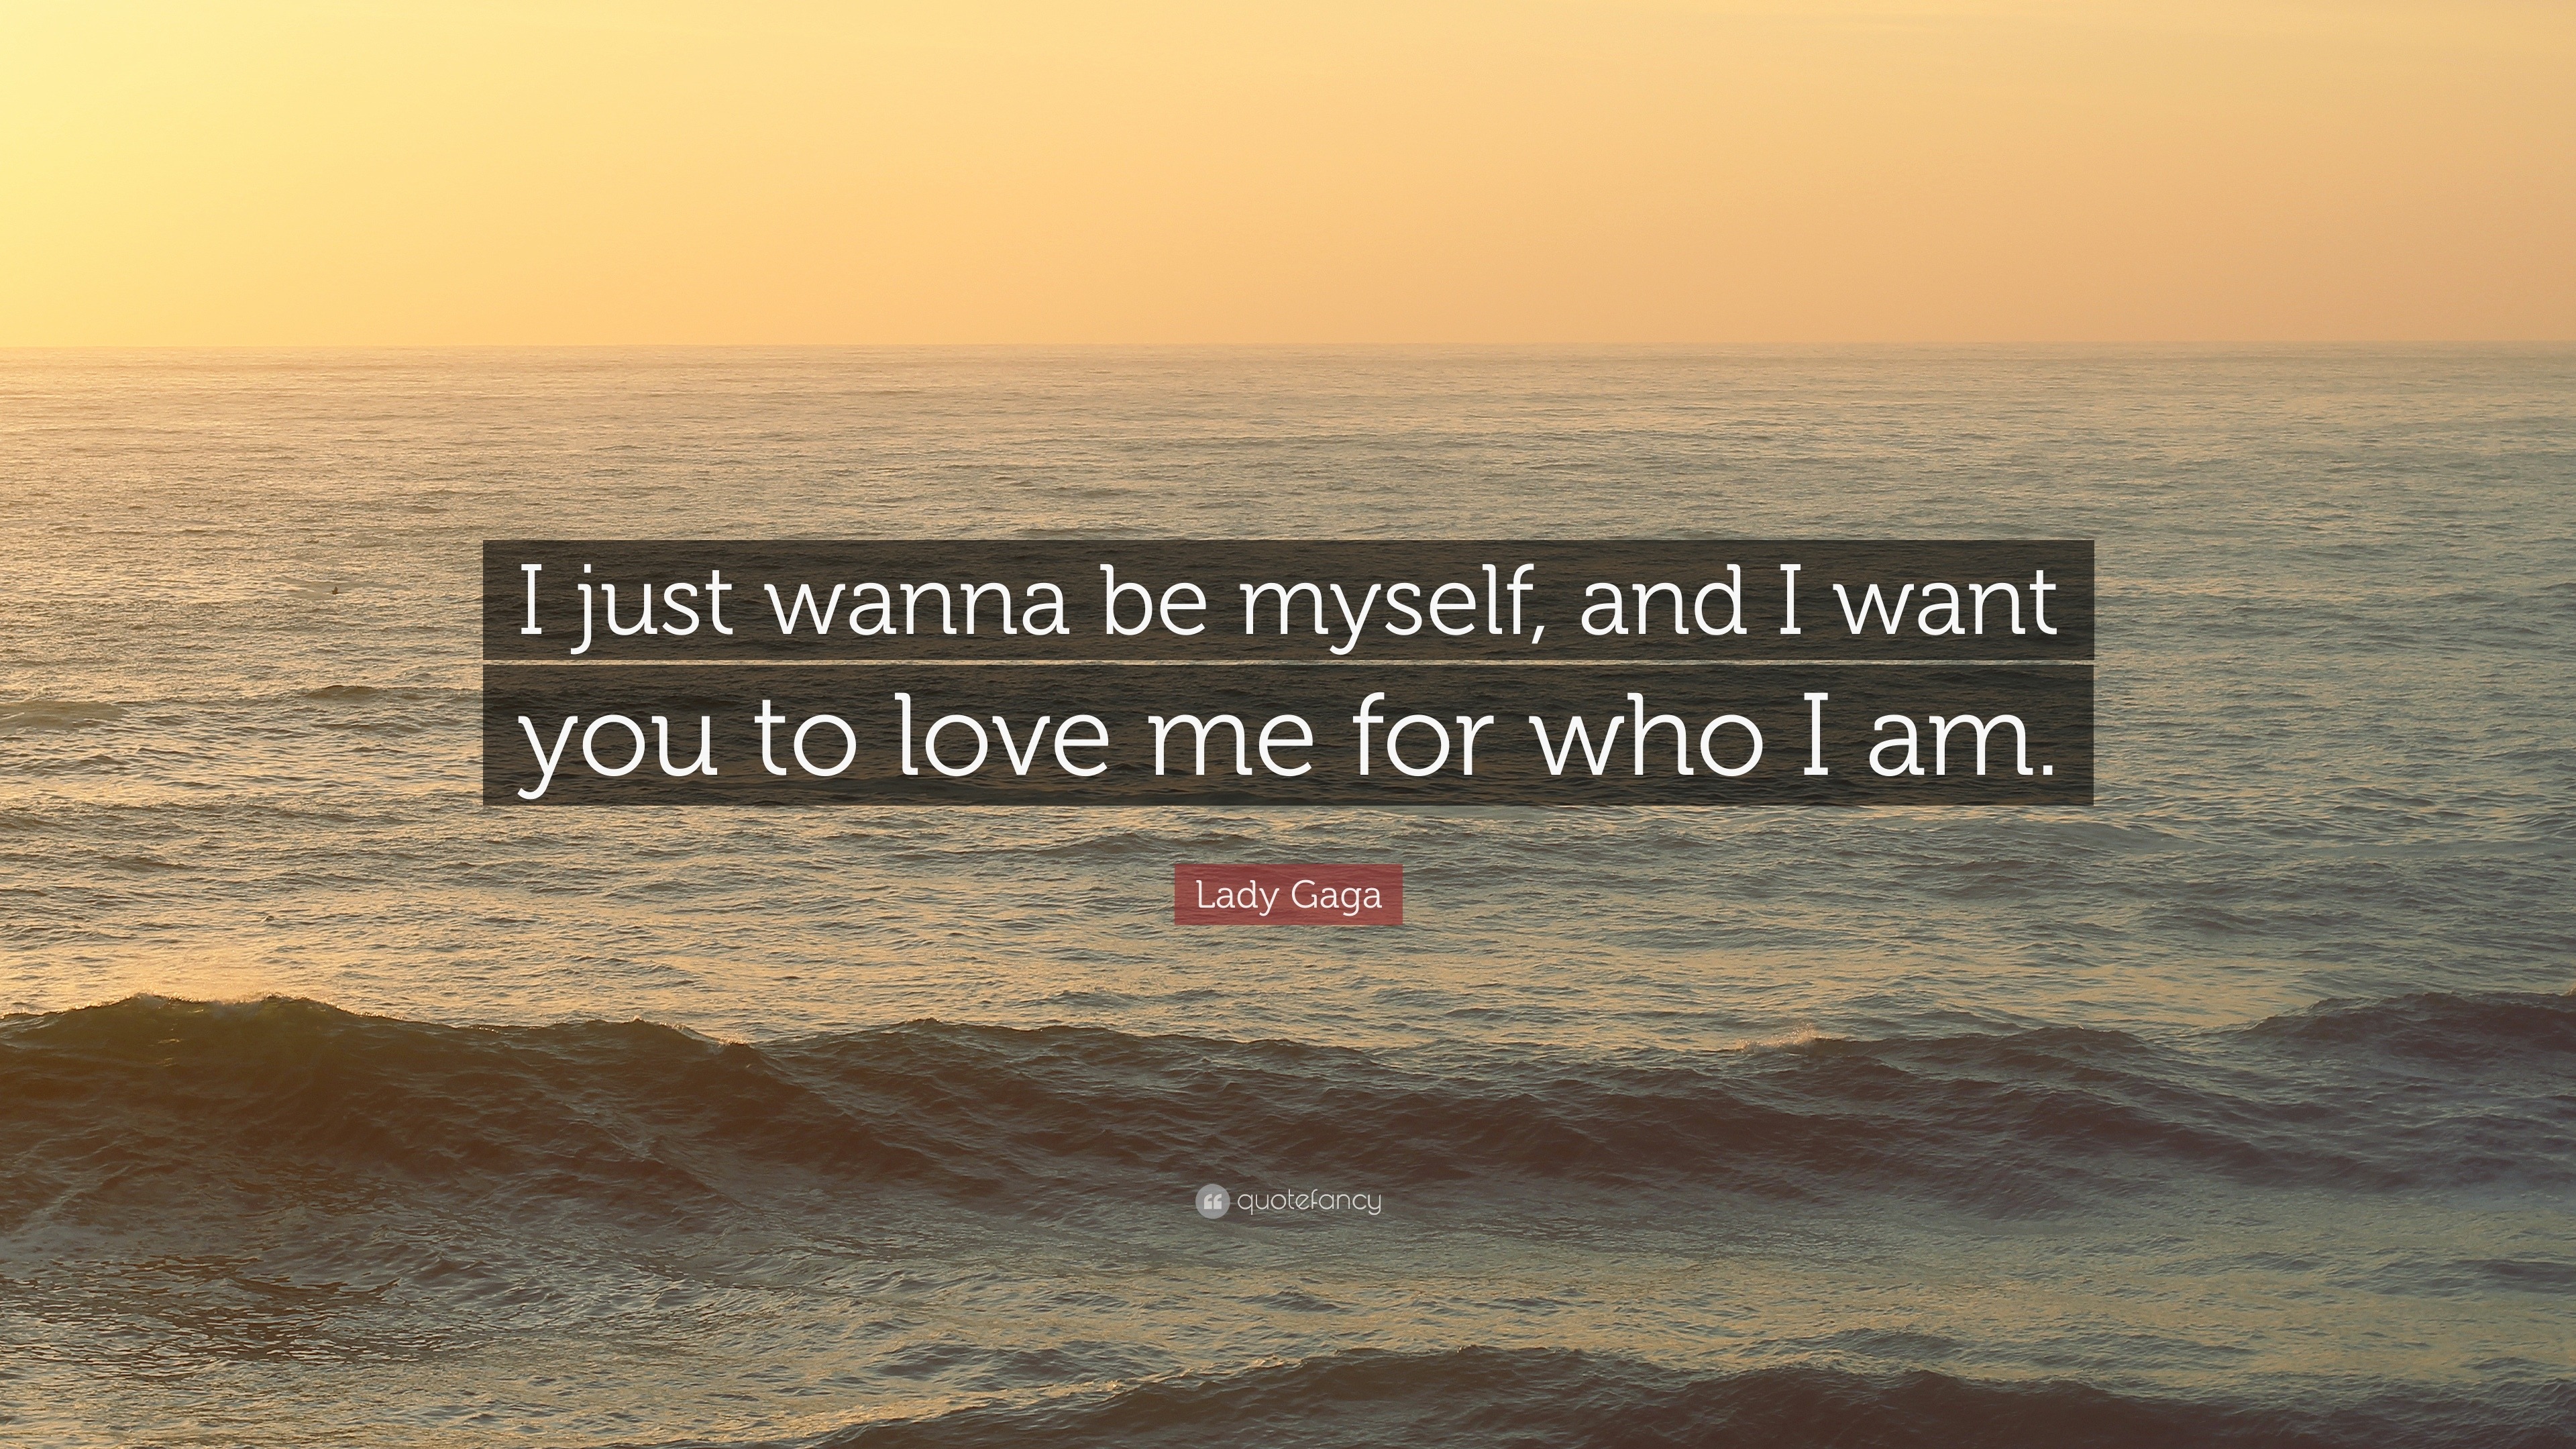 Lady Gaga Quote: “I just wanna be myself, and I want you ...